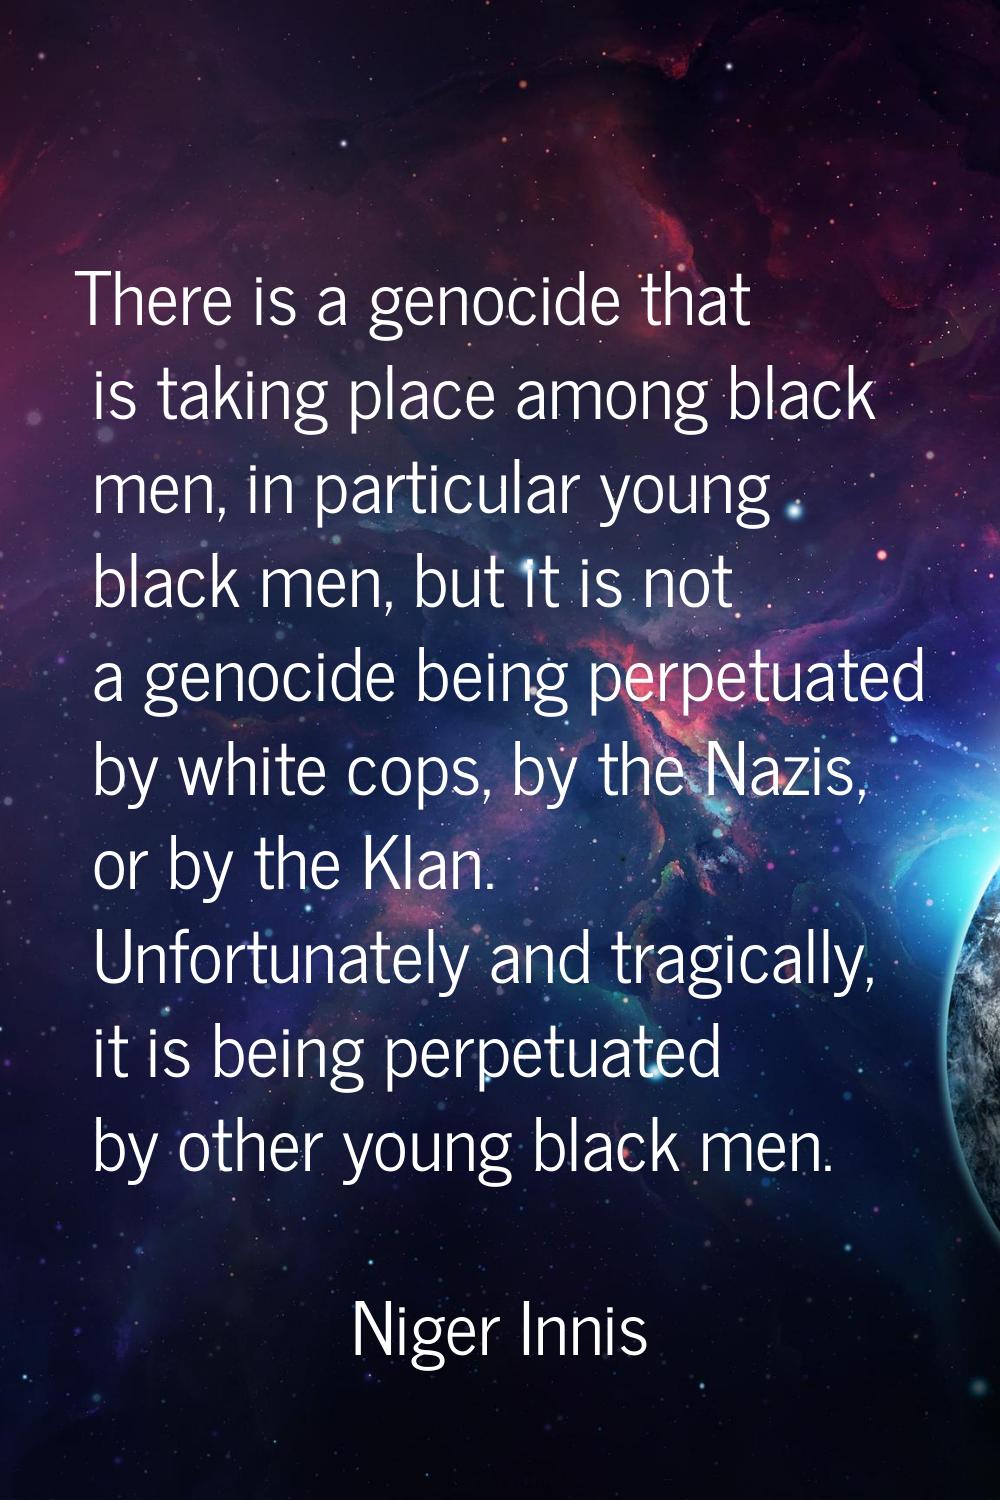 There is a genocide that is taking place among black men, in particular young black men, but it is 